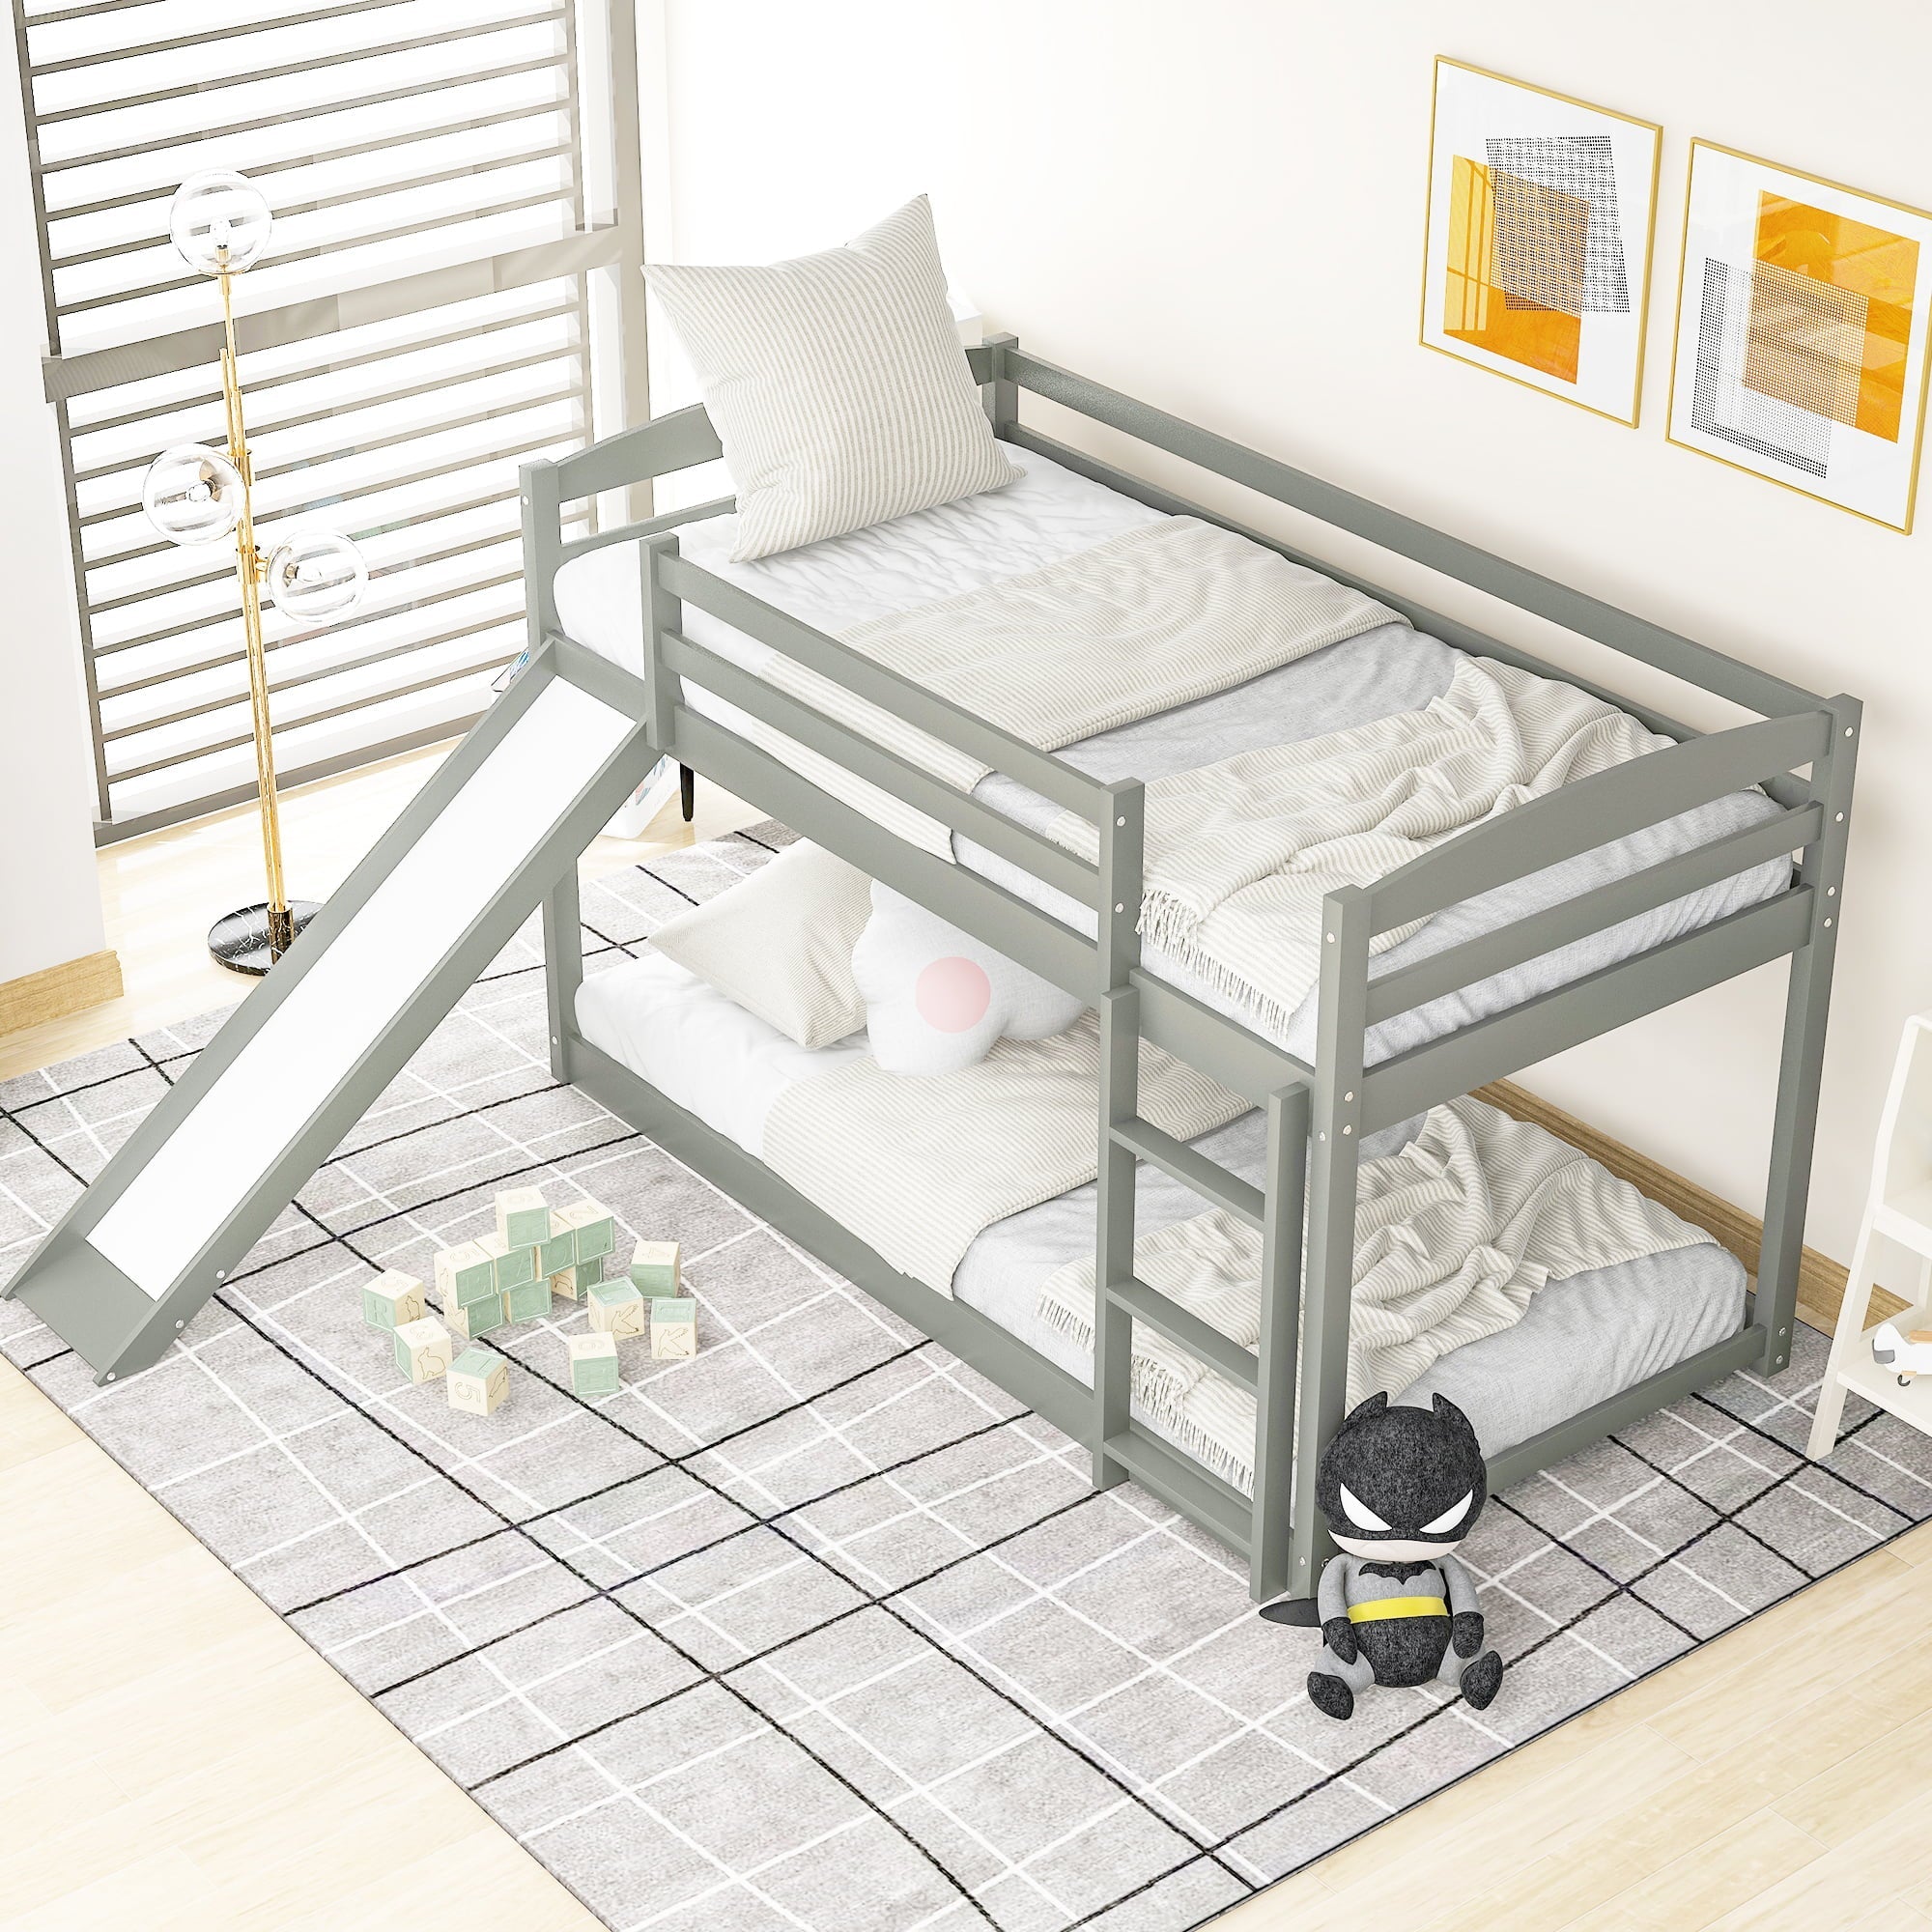 Floor Bunk Bed with Convertible Slide and Ladder, SESSLIFE Wood Bunk Beds with Guardrail for Boys Girls Toddlers, Gray Twin Over Twin Bunk Bed, Kids Floor Bunk Bed for Home Children’s Room, TE838